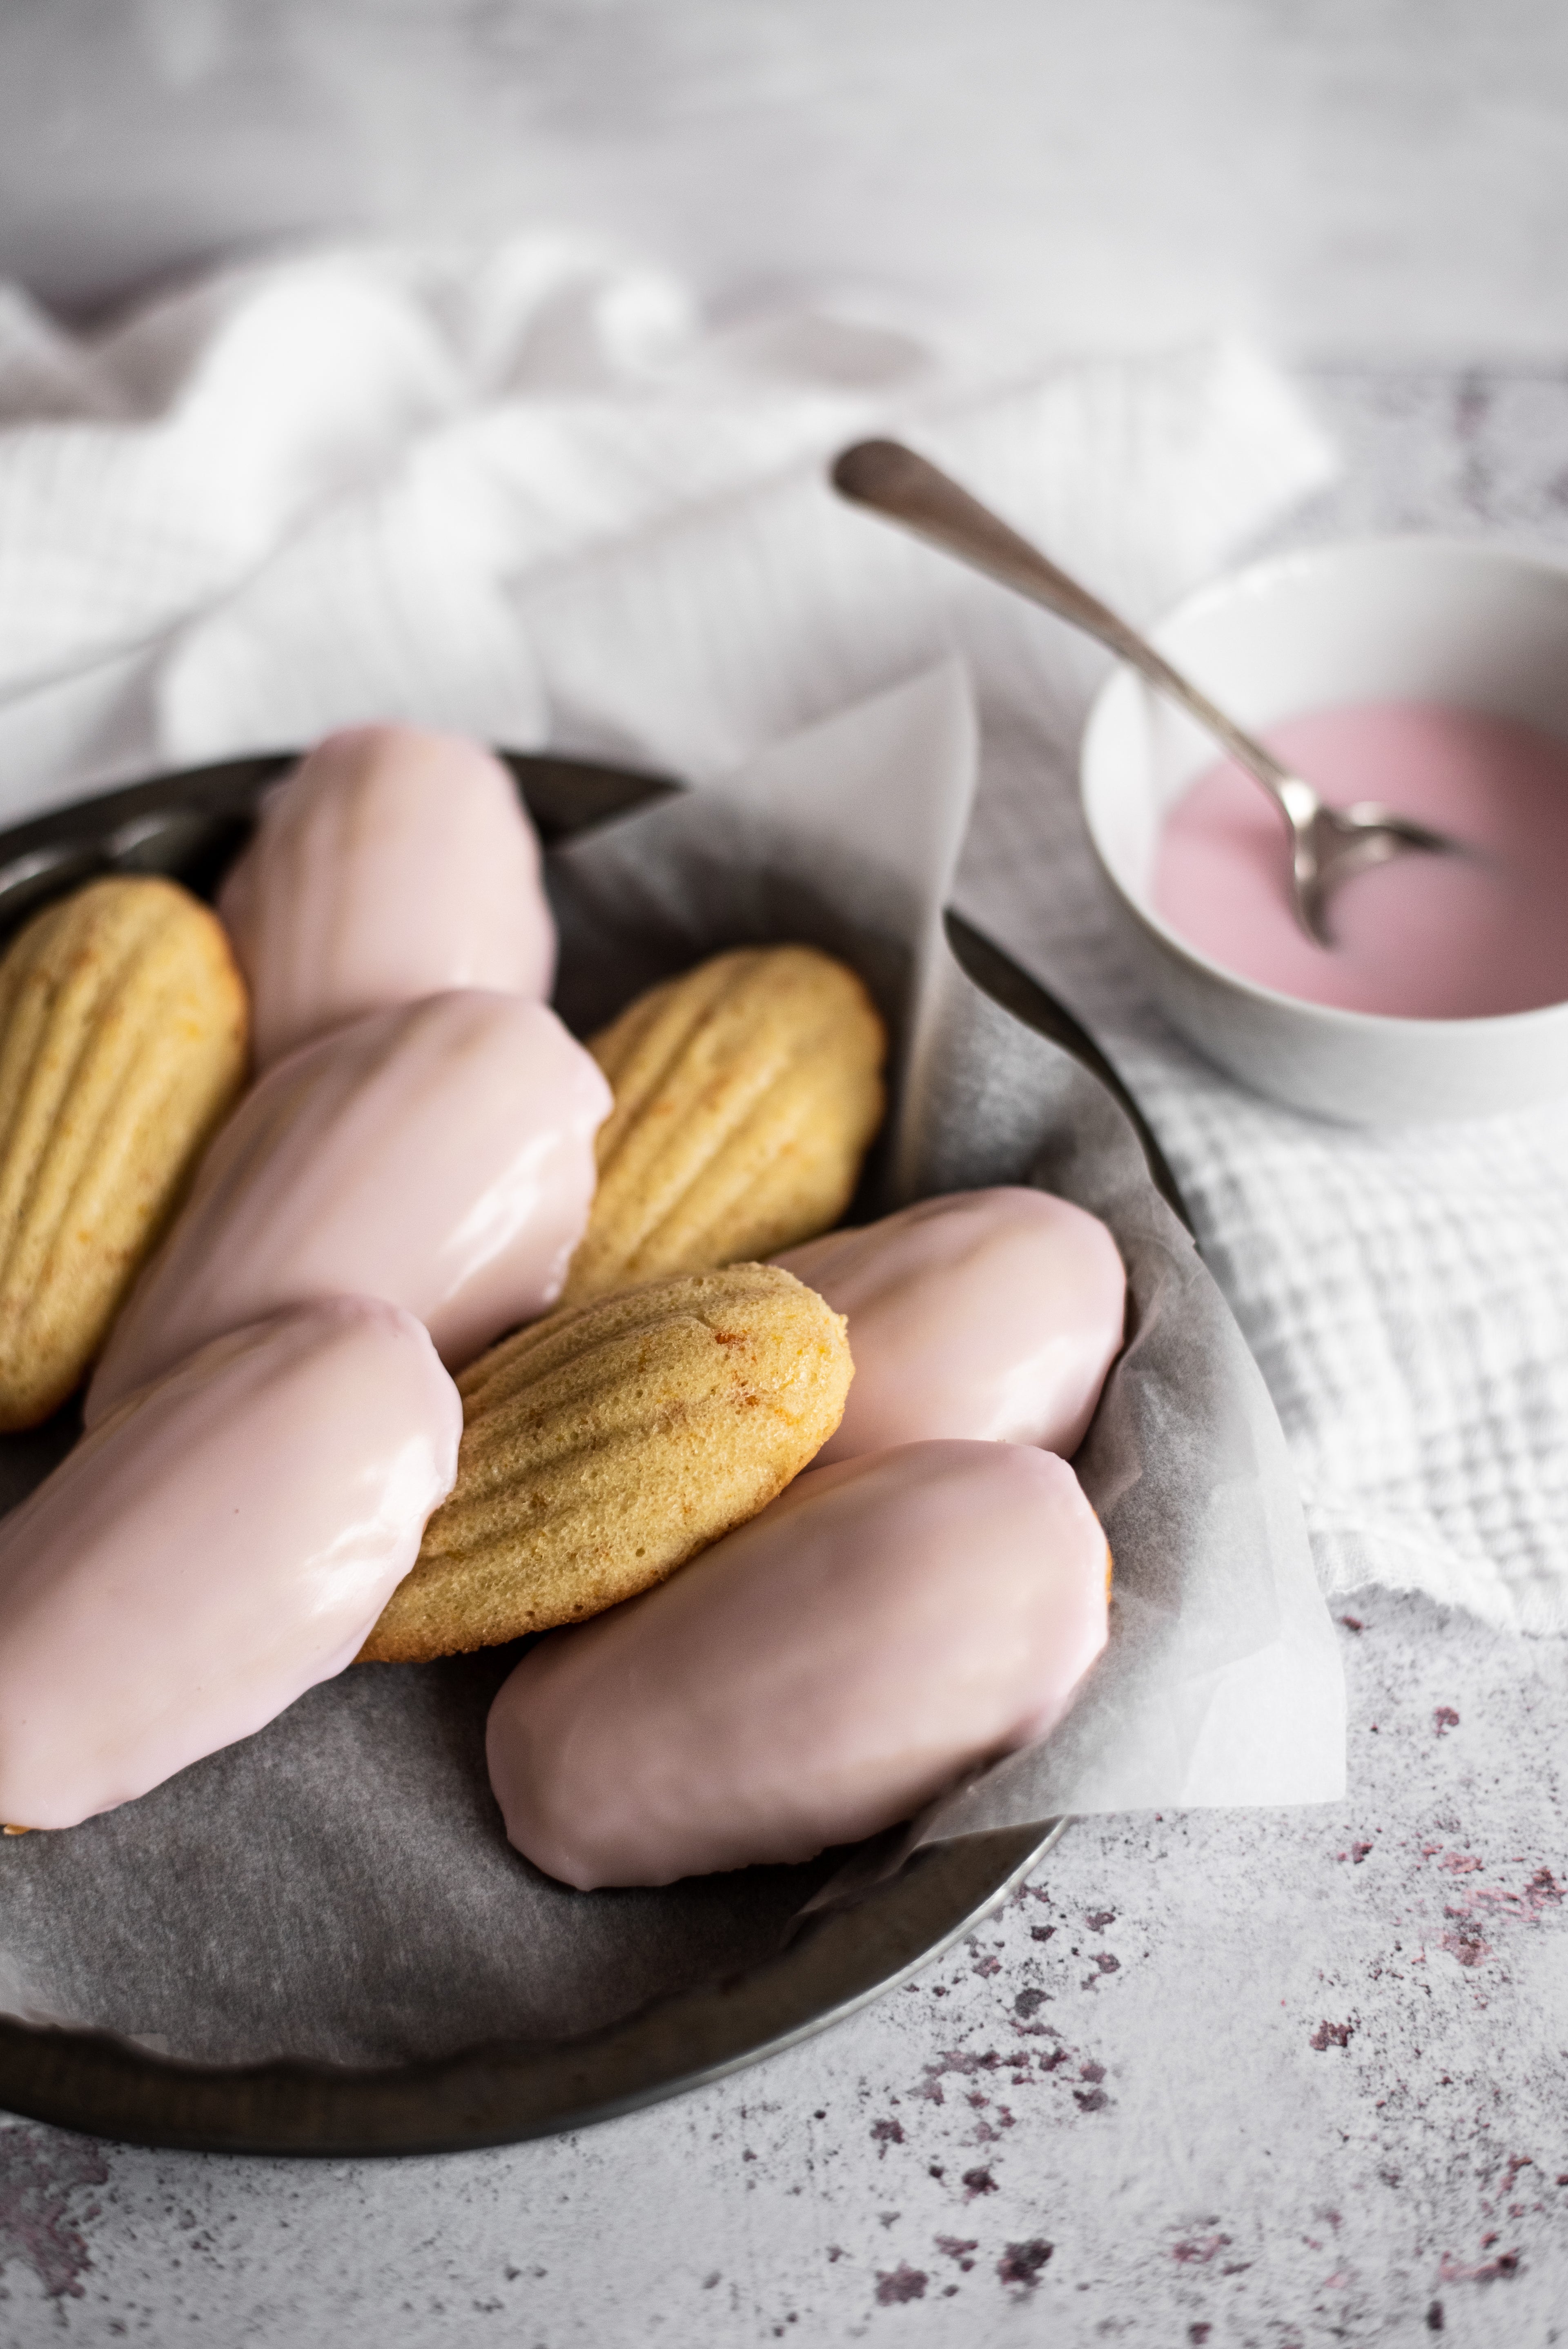 Madeleine sponge cakes with pink icing